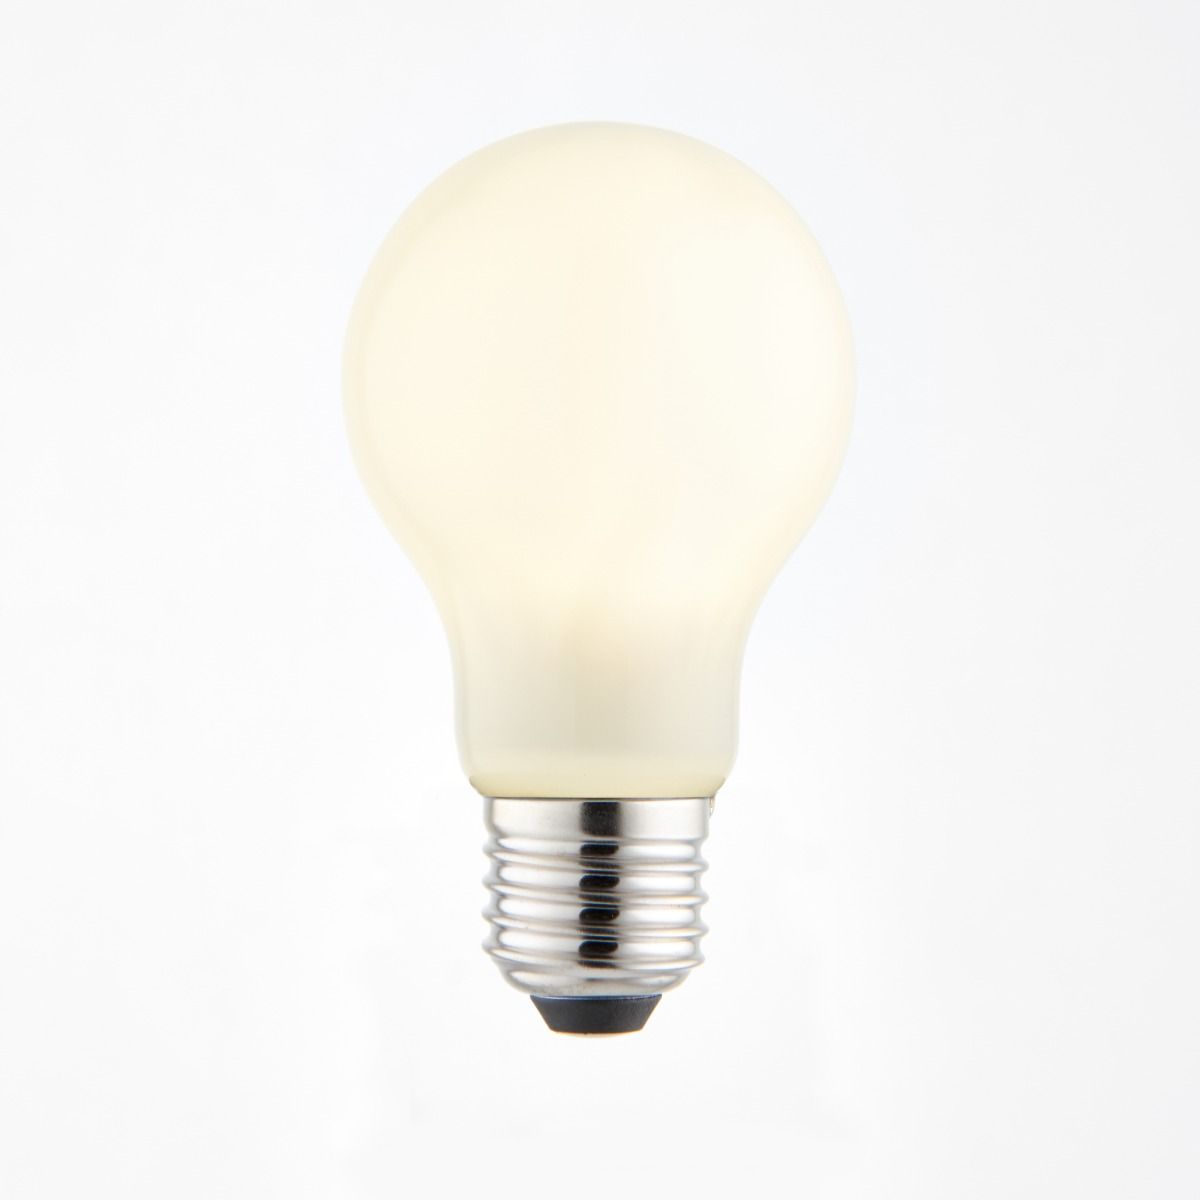 E27/ES 7w LED GLS Coated Cool White Dimmable Light Bulb